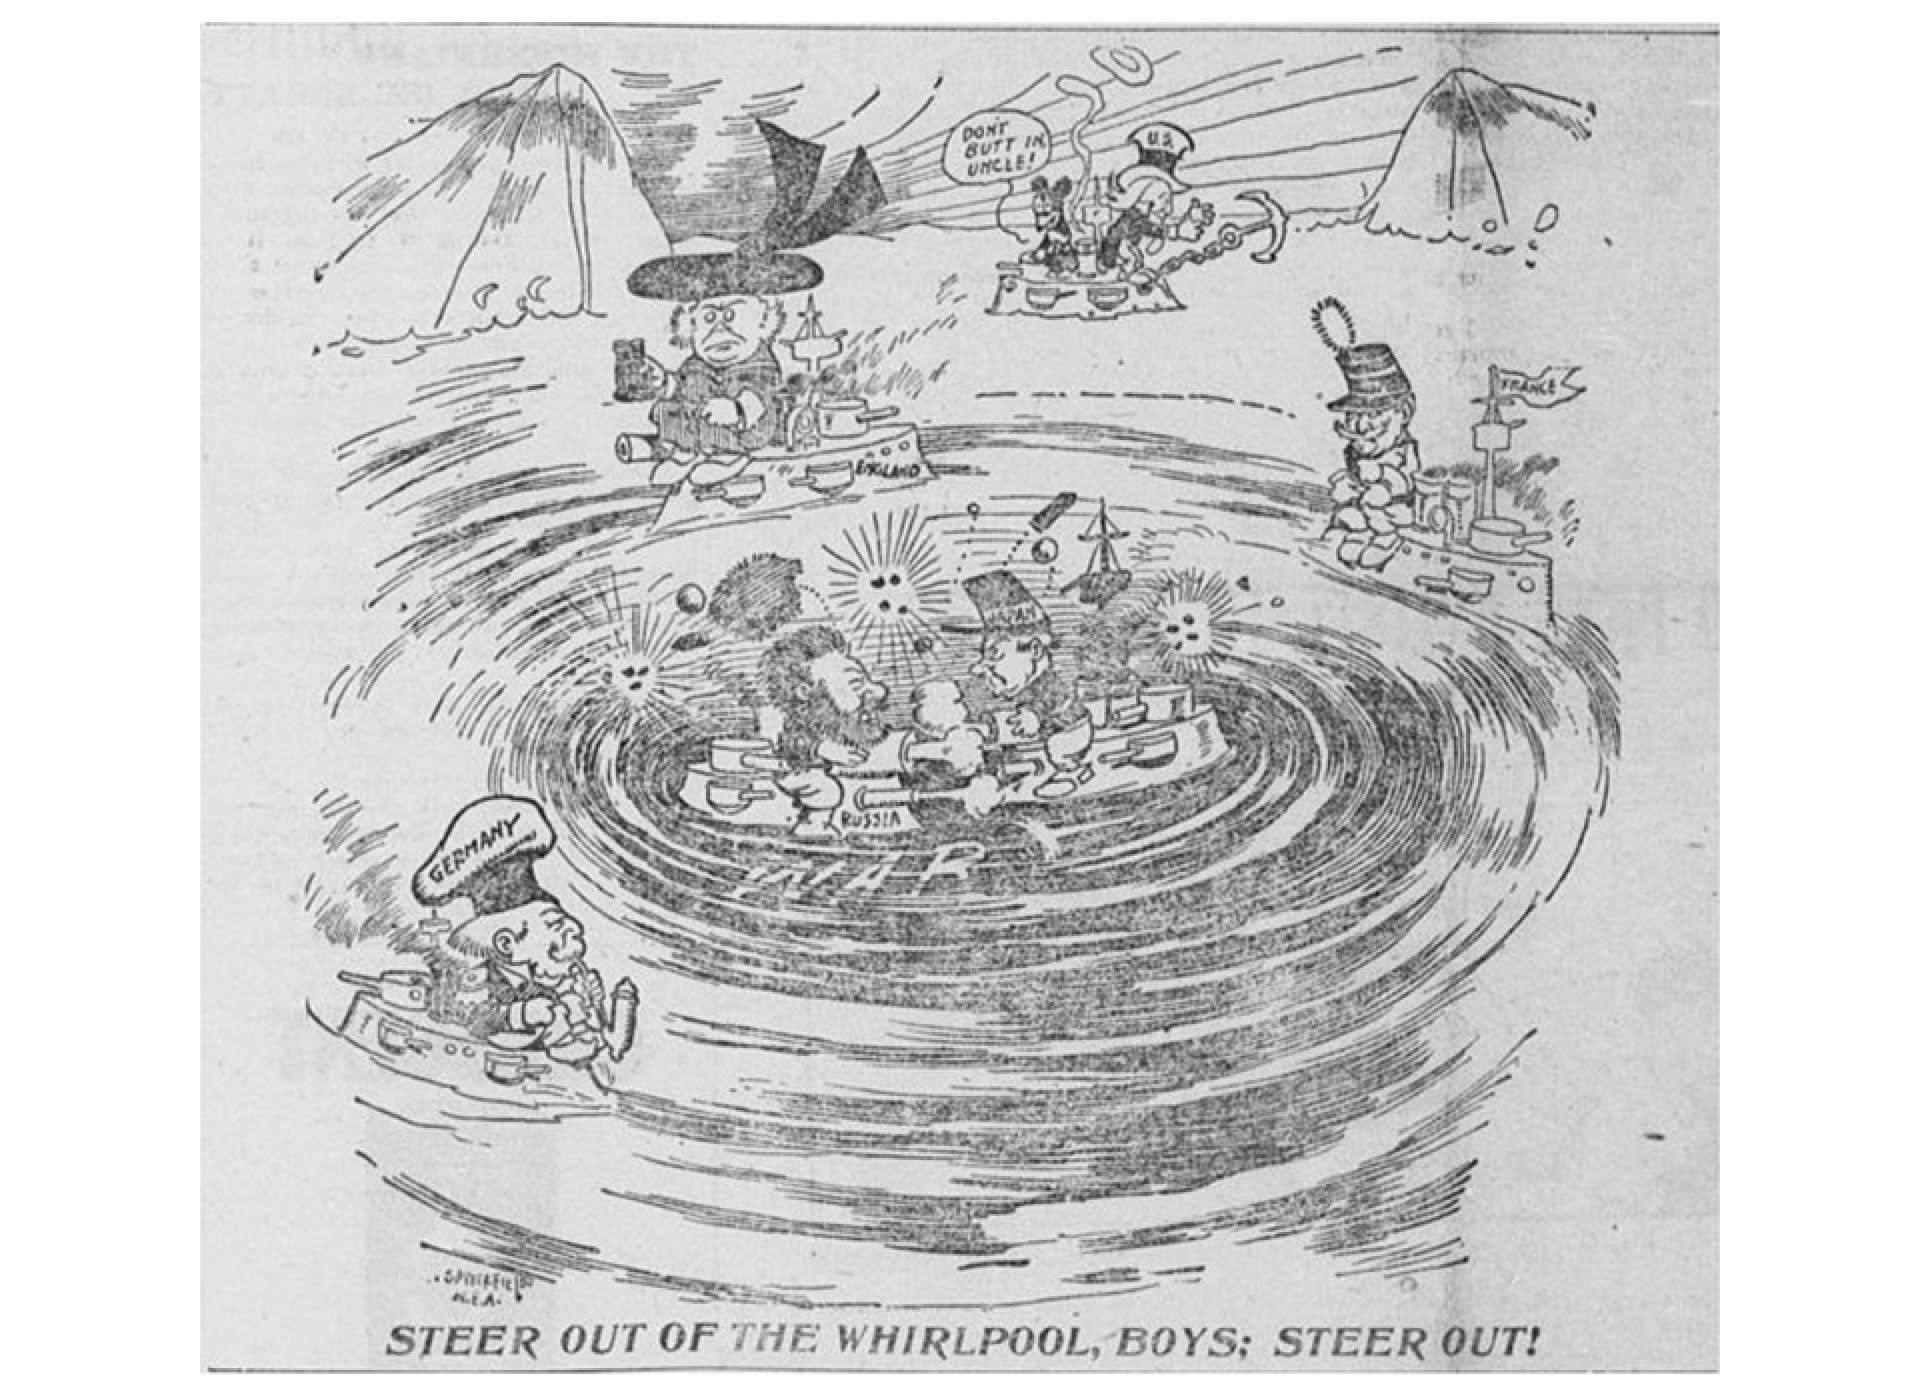 Political cartoon from February 15, 1904 by Bob Satterfield depicting the Russo-Japanese War as a whirpool risking drawing in Germany, Britain, and France